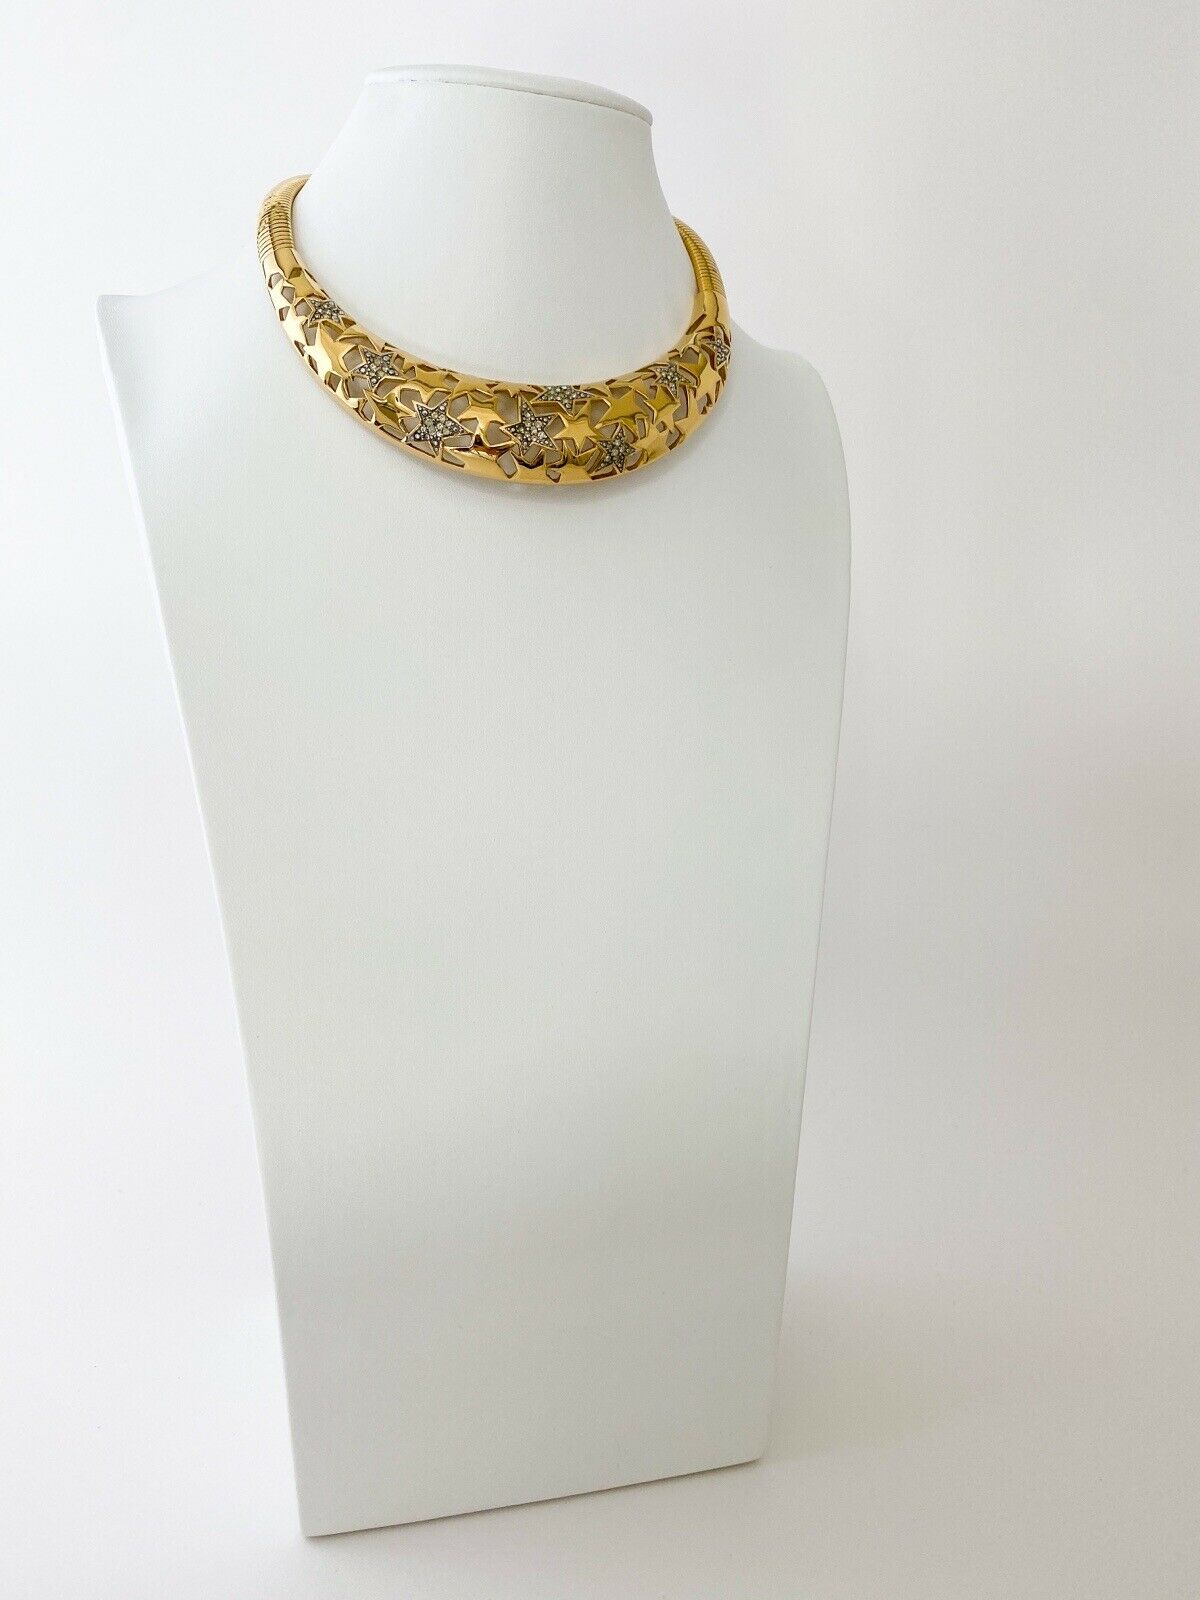 【SOLD OUT】Givenchy Paris New York Vintage Gold Tone Star Collar Necklace Rhinestone